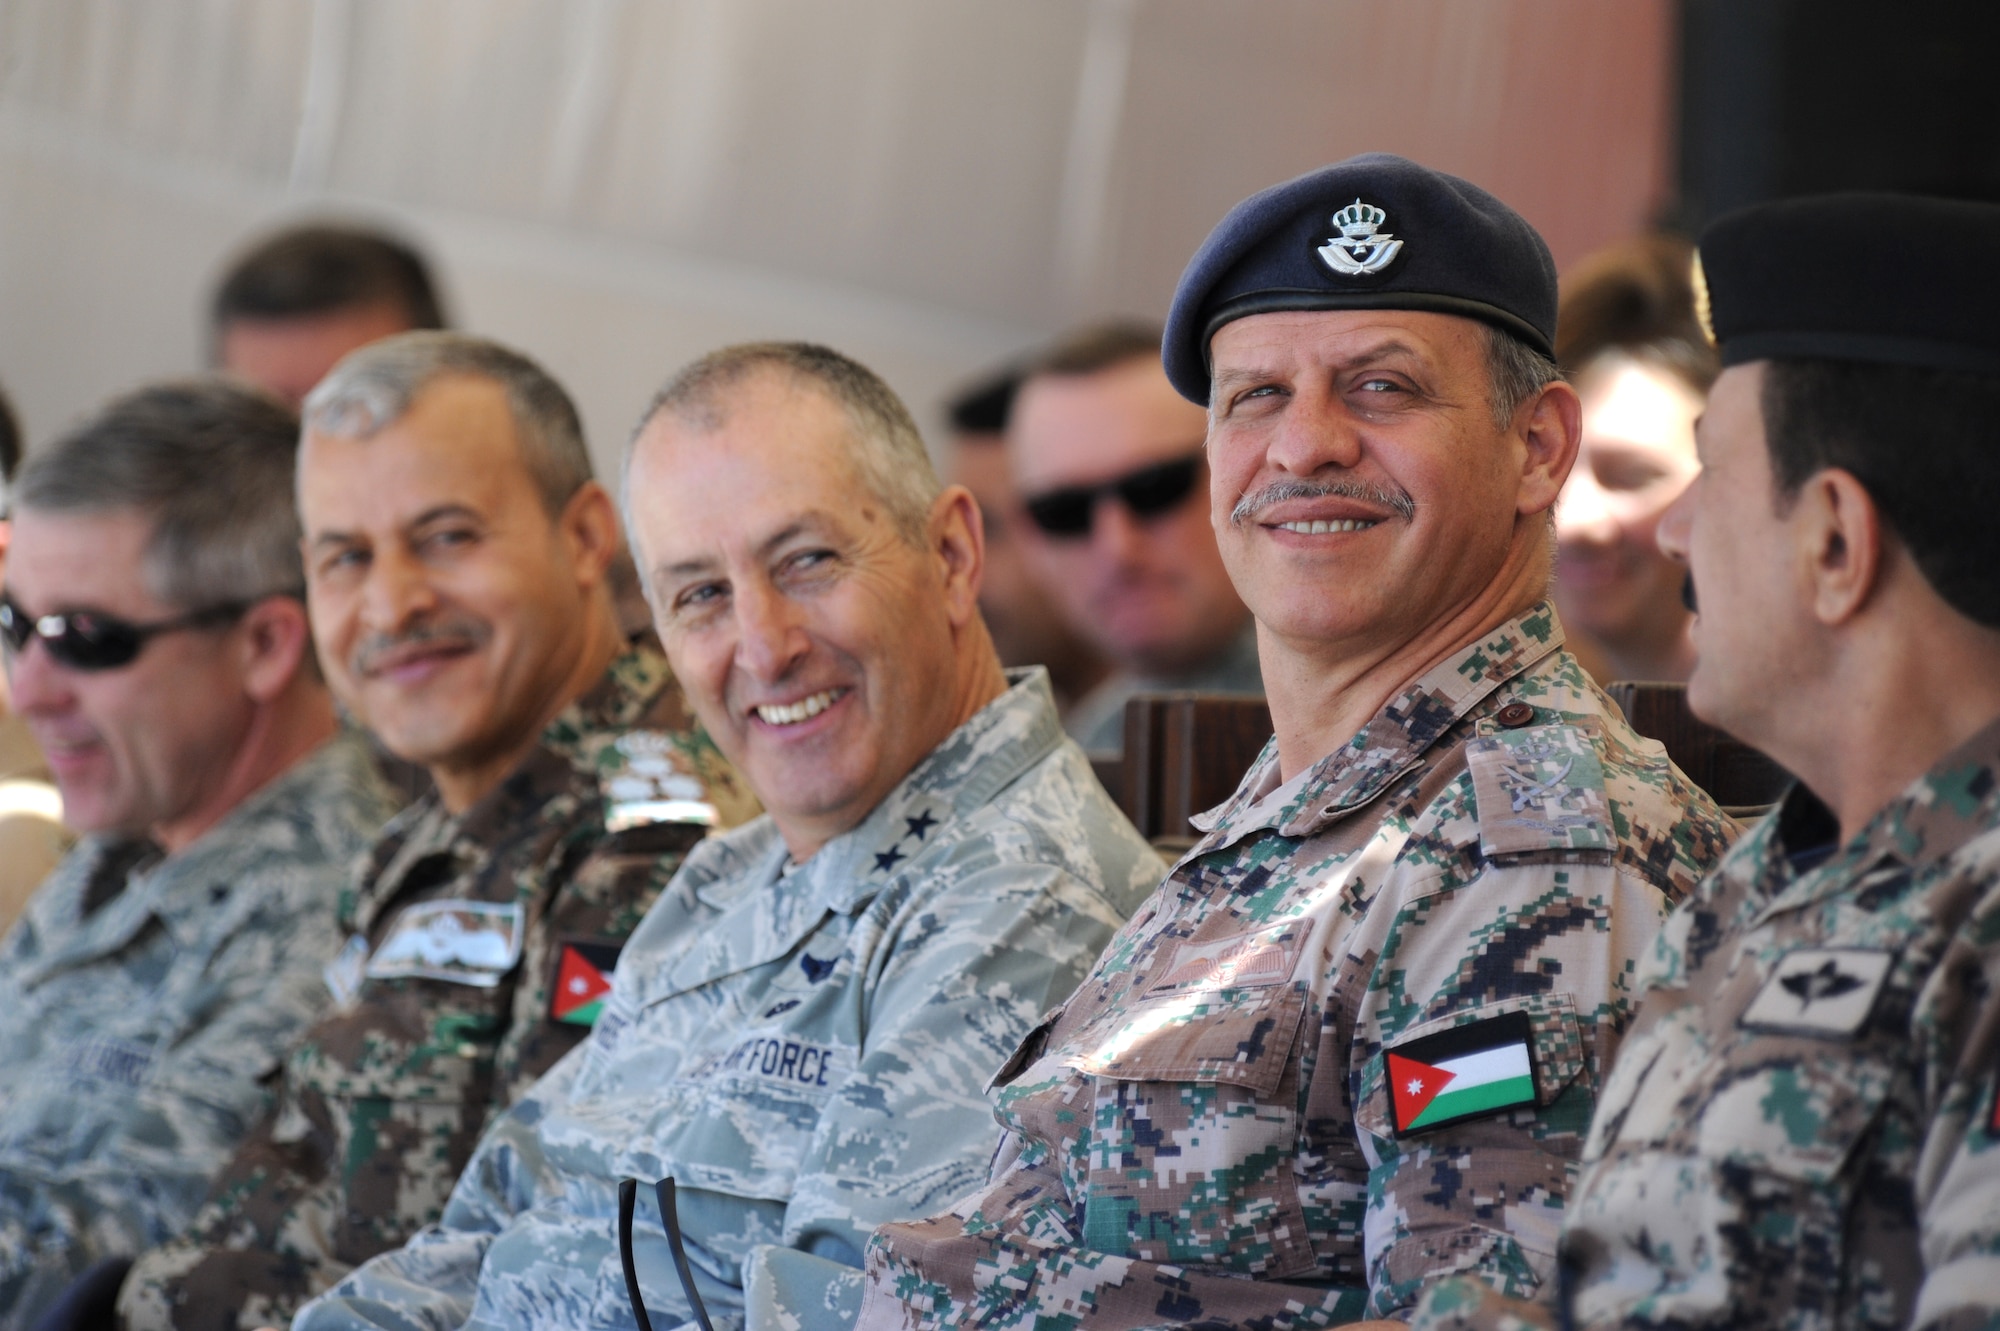 His Royal Highness Prince Faisal bin al-Hussein of Jordan, right, watches a first-run attack competition with U.S. Air Force Maj. Gen. Mike Edwards, adjutant general of the Colorado Air National Guard, center, during Exercise Eager Tiger May 14, 2014, at an air base in northern Jordan. This year marks the 10th year the COANG and Jordan have been paired under the National Guard Bureau's State Partnership Program. (U.S. Air Force photo by Staff Sgt. Brigitte N. Brantley/Released)